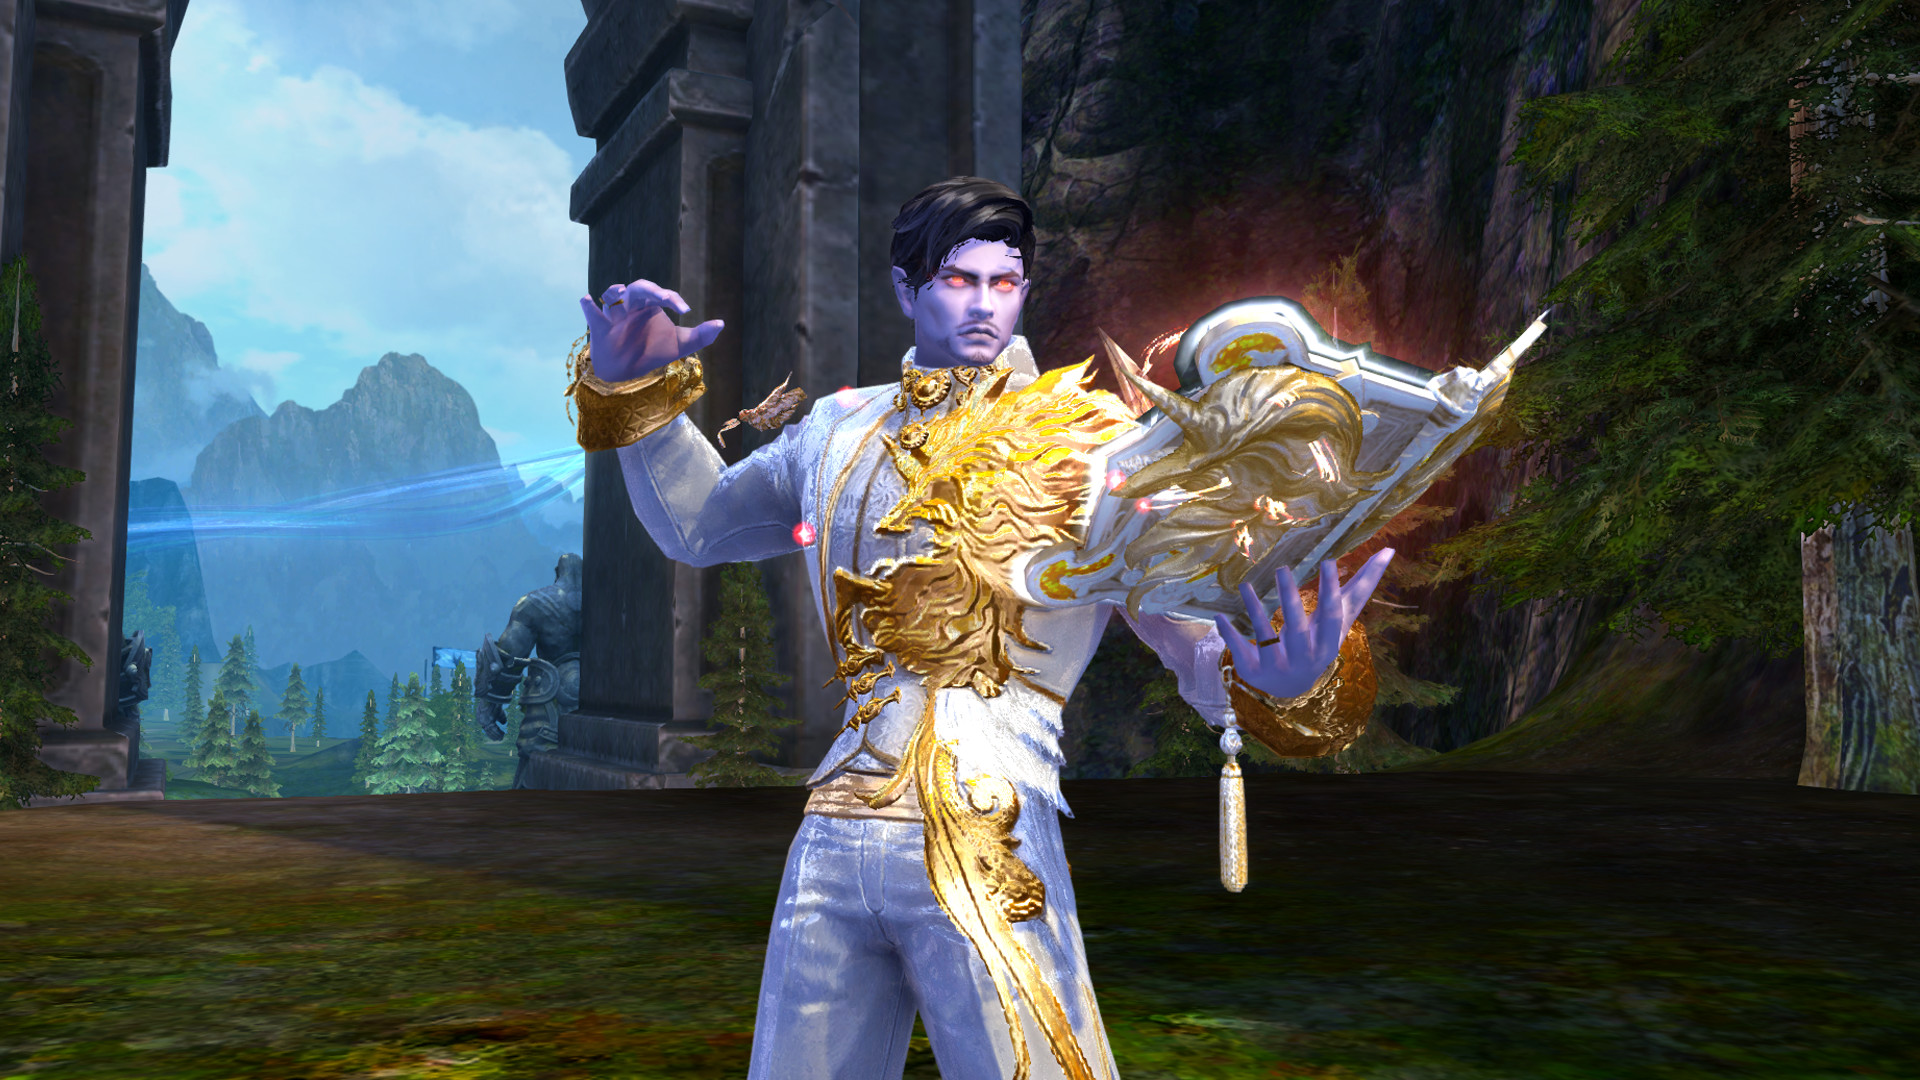 Aion Free-to-Play Fantasy MMORPG, for PC, Steam and Consoles